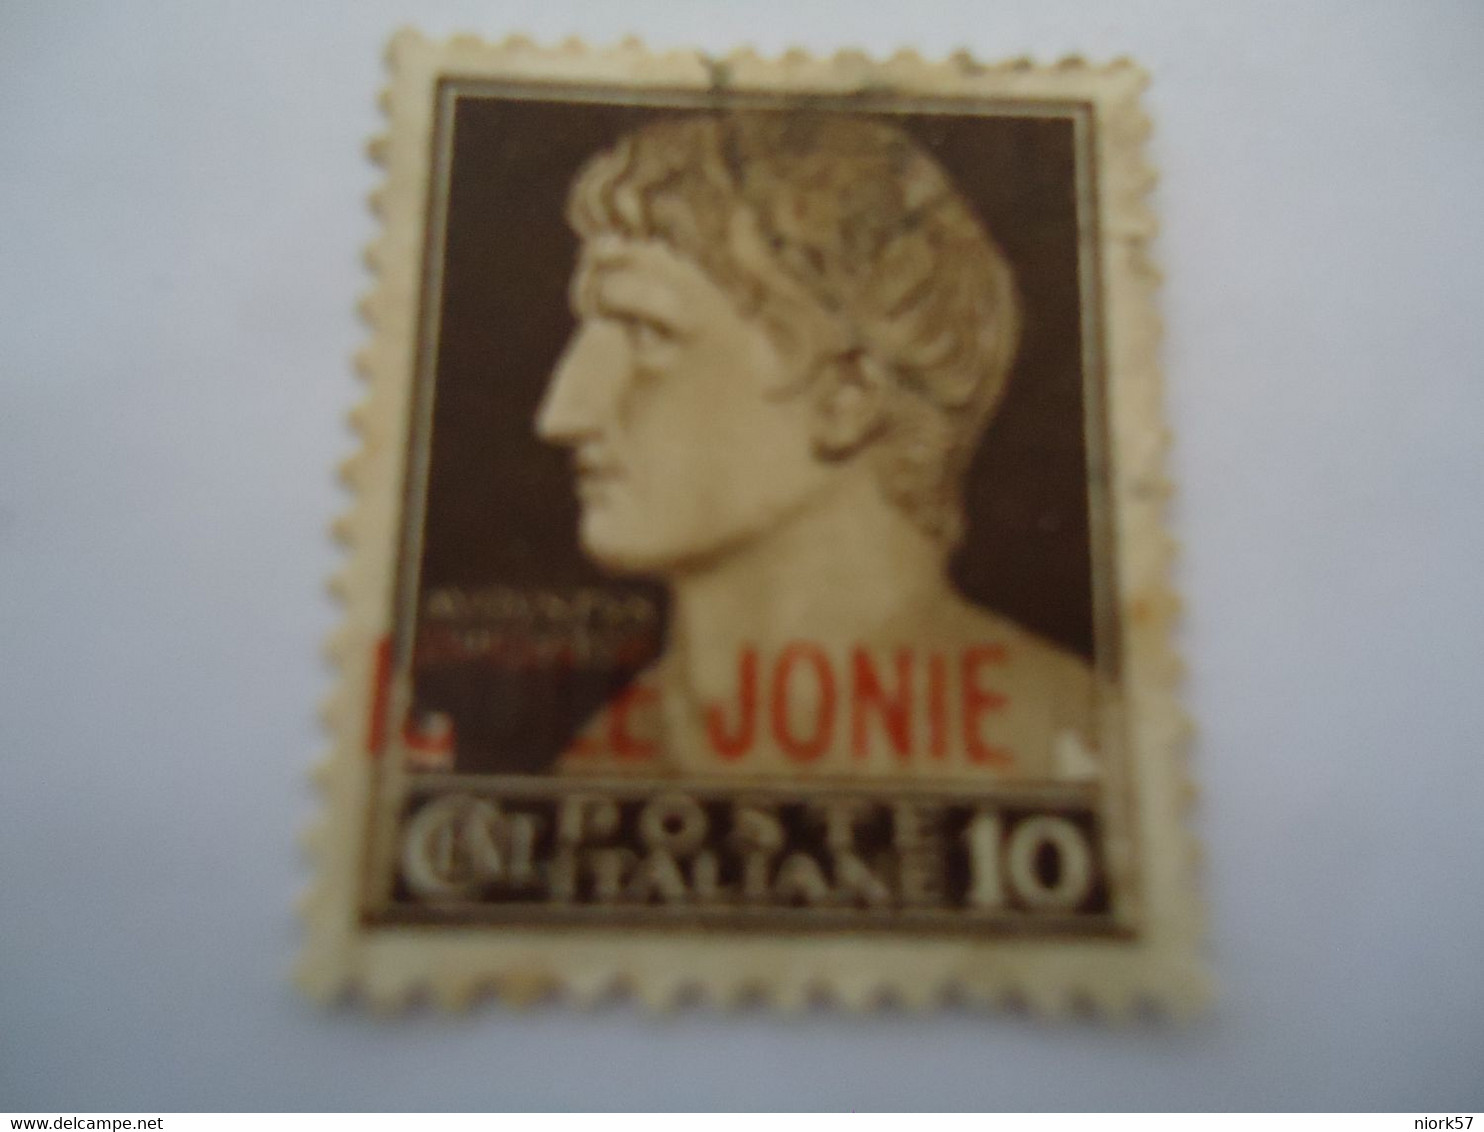 GREECE  USED ITALY   STAMPS JONIE - Ionian Islands